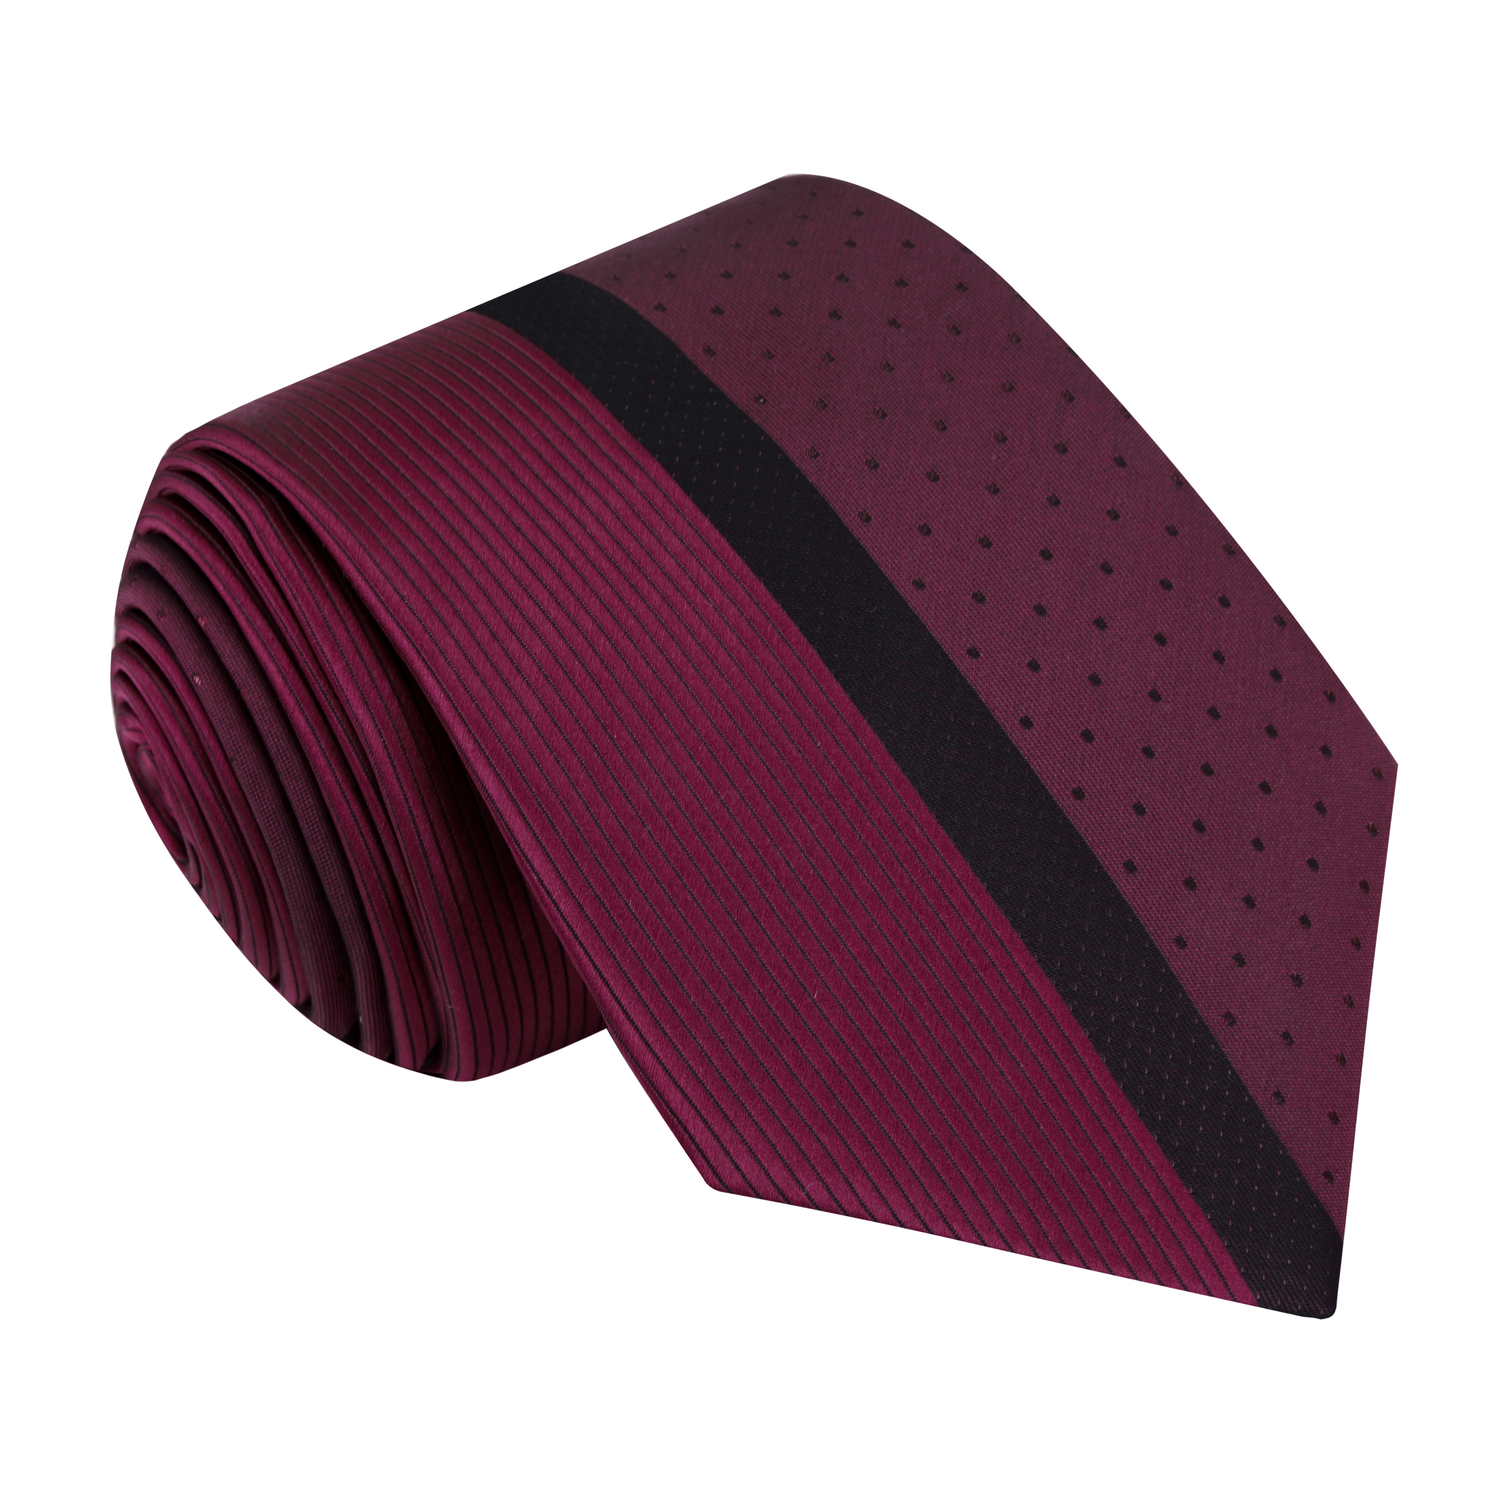 Burgundy and Black Lined Necktie 